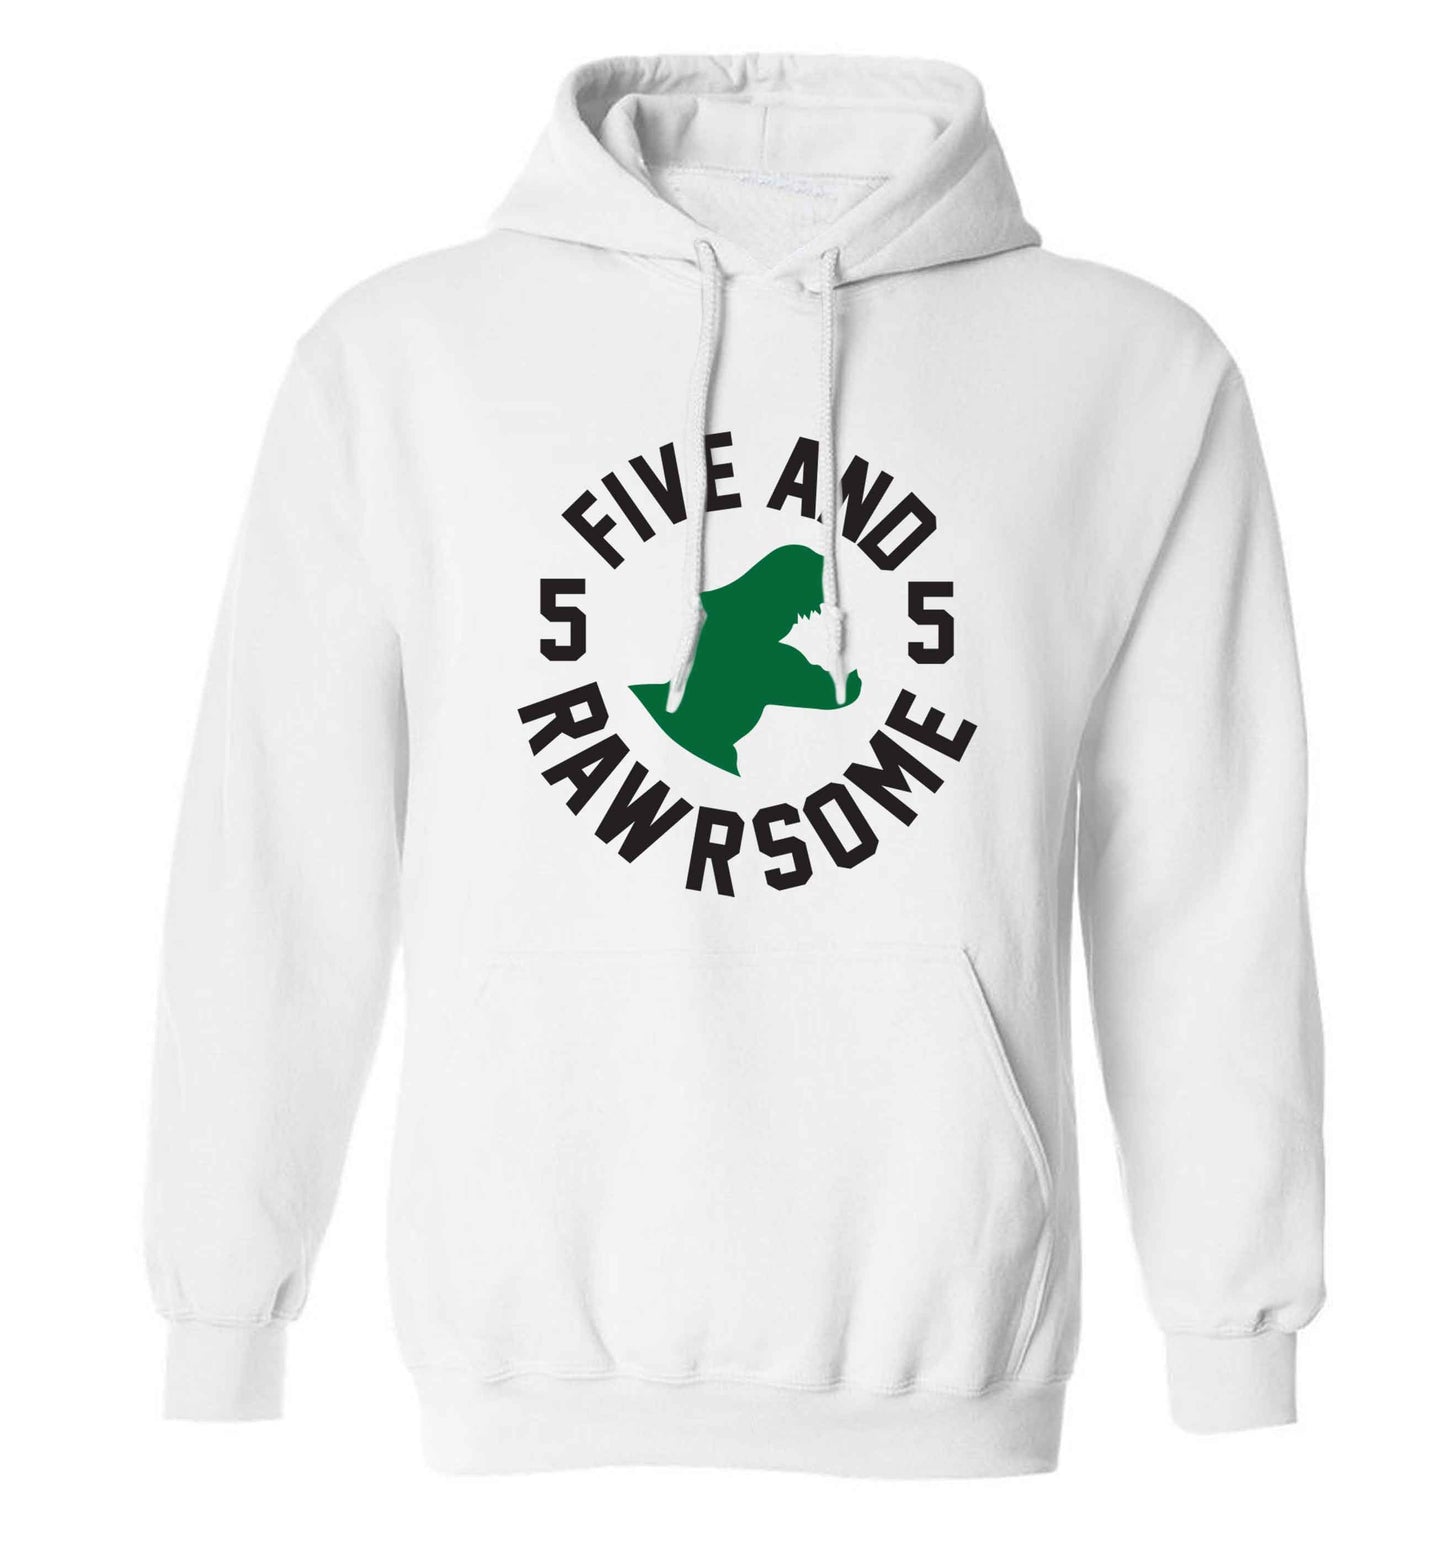 Five and rawrsome adults unisex white hoodie 2XL